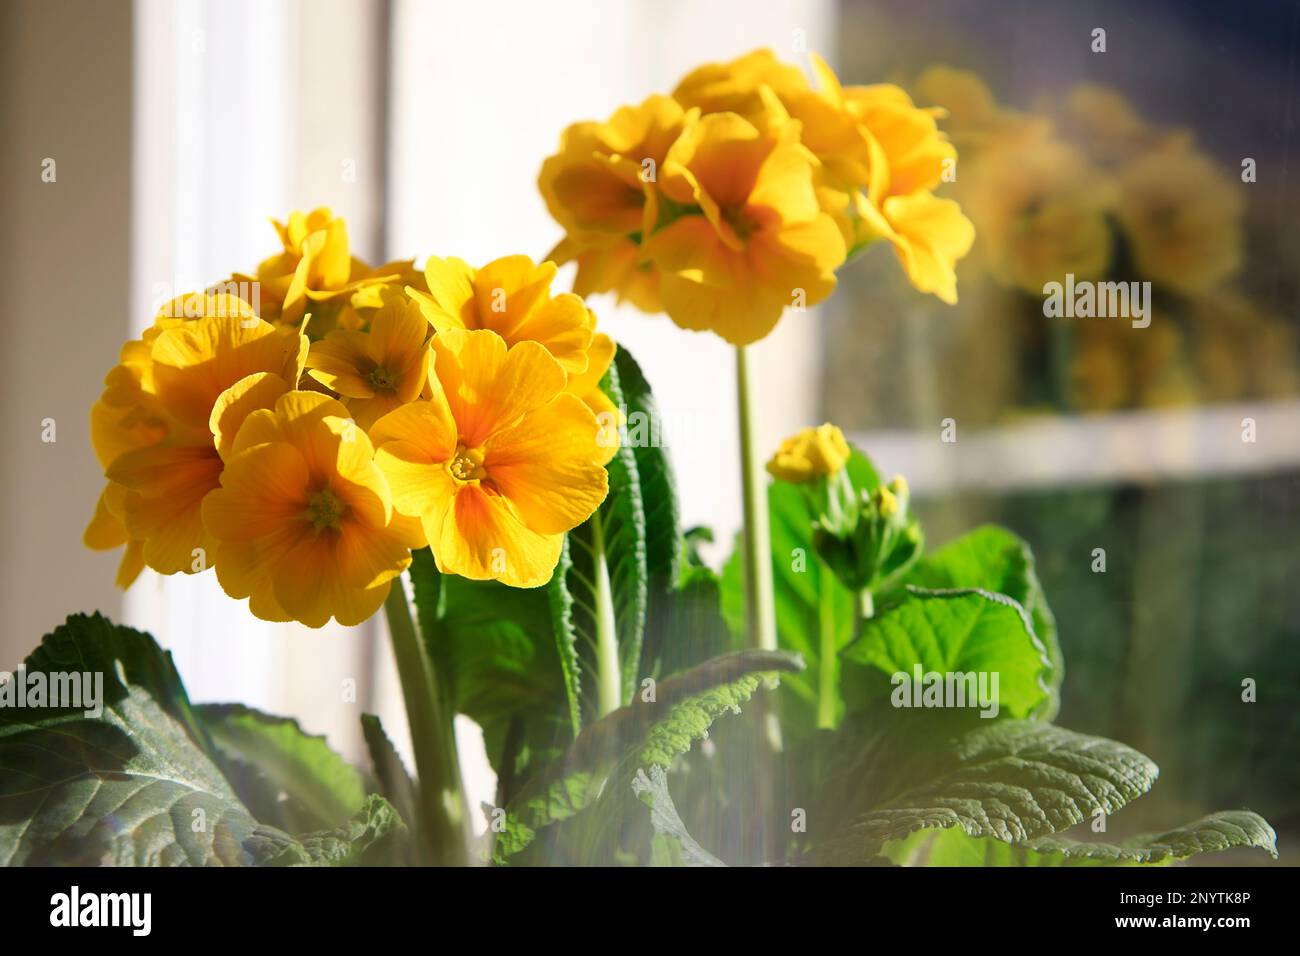 Fresh spring flower primula elatior, golden yellow flowers indoors. Primrose flower head close-up with green leaves, spring potted plant. Stock Photo